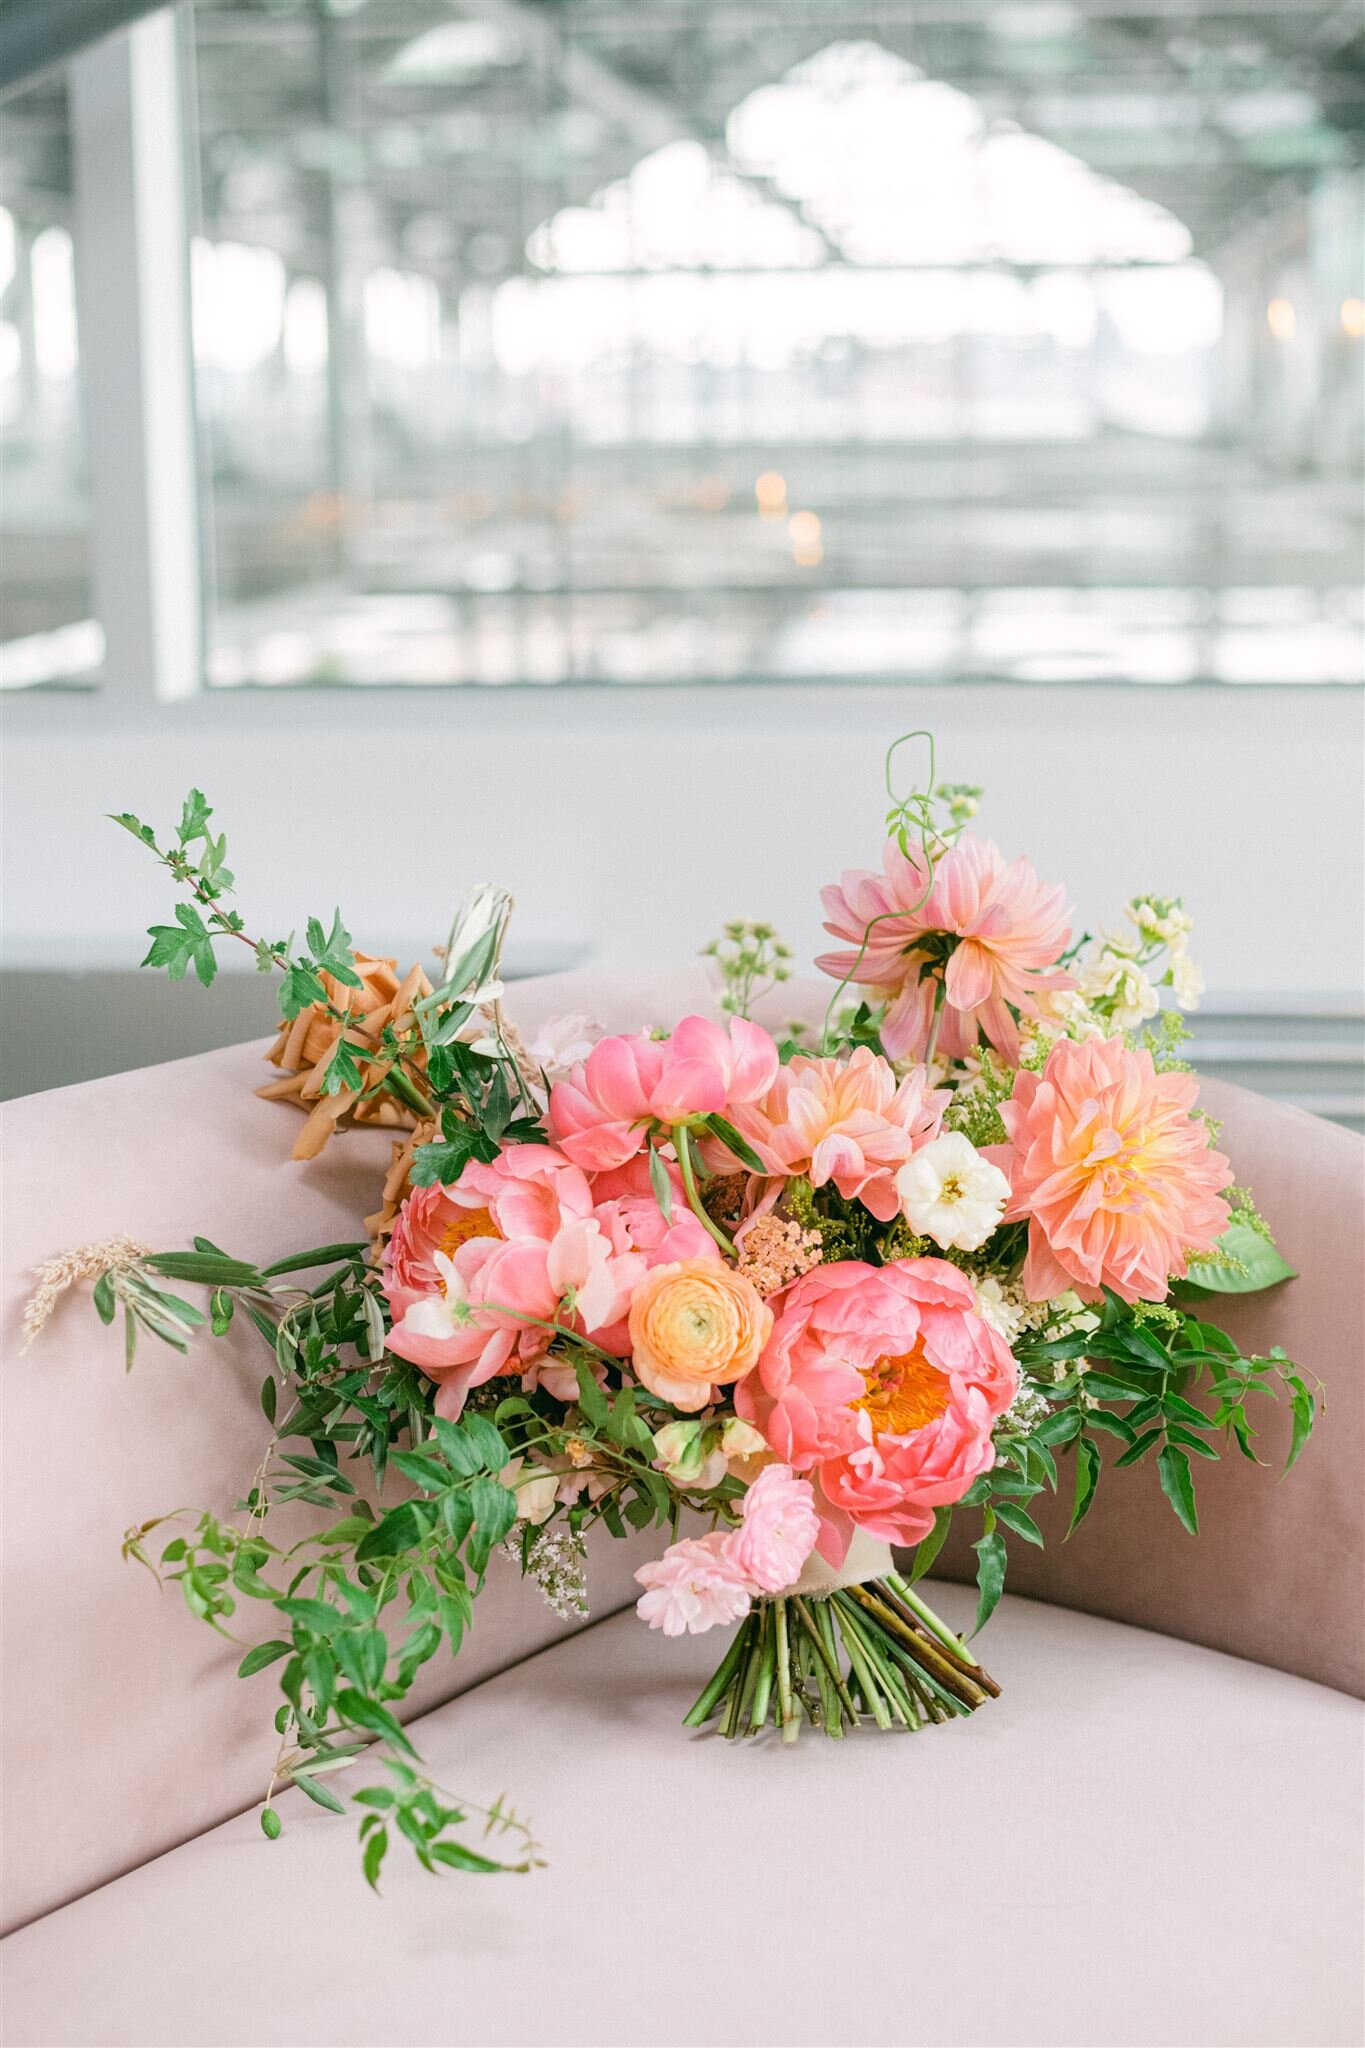 Photography: Blush Wed Photography